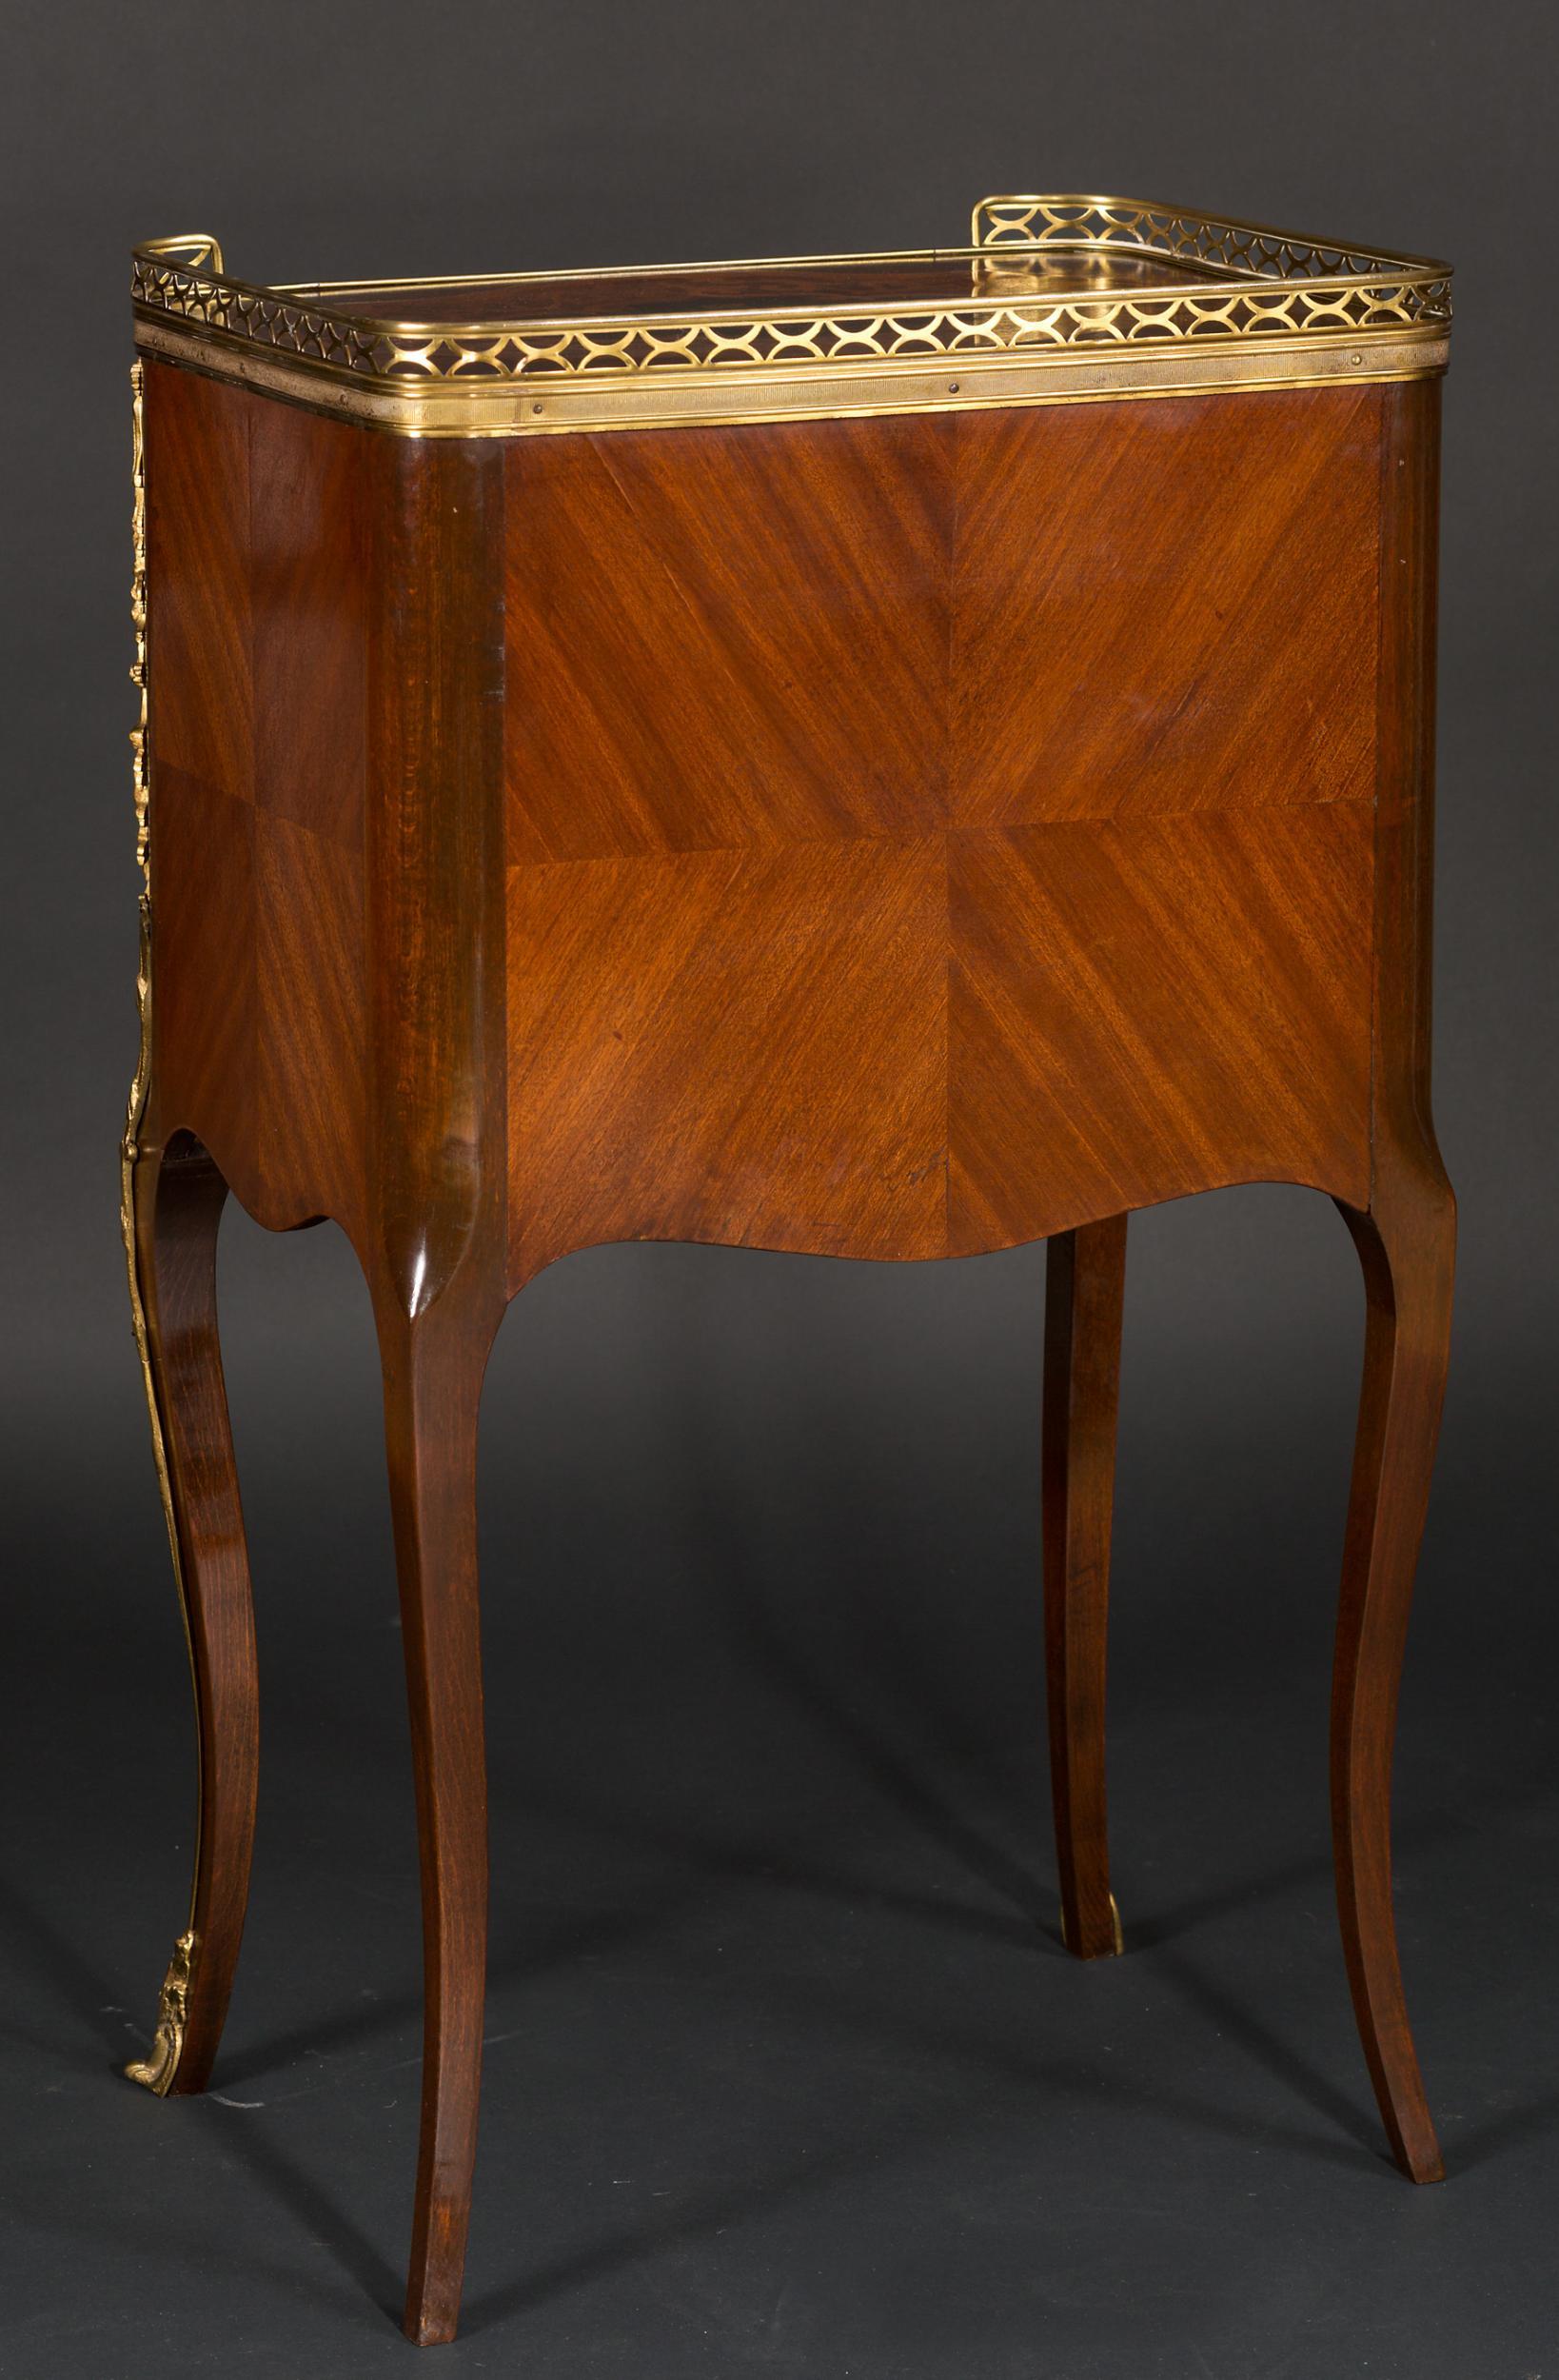 Victorian French Mahogany Inlaid Table with Drawers